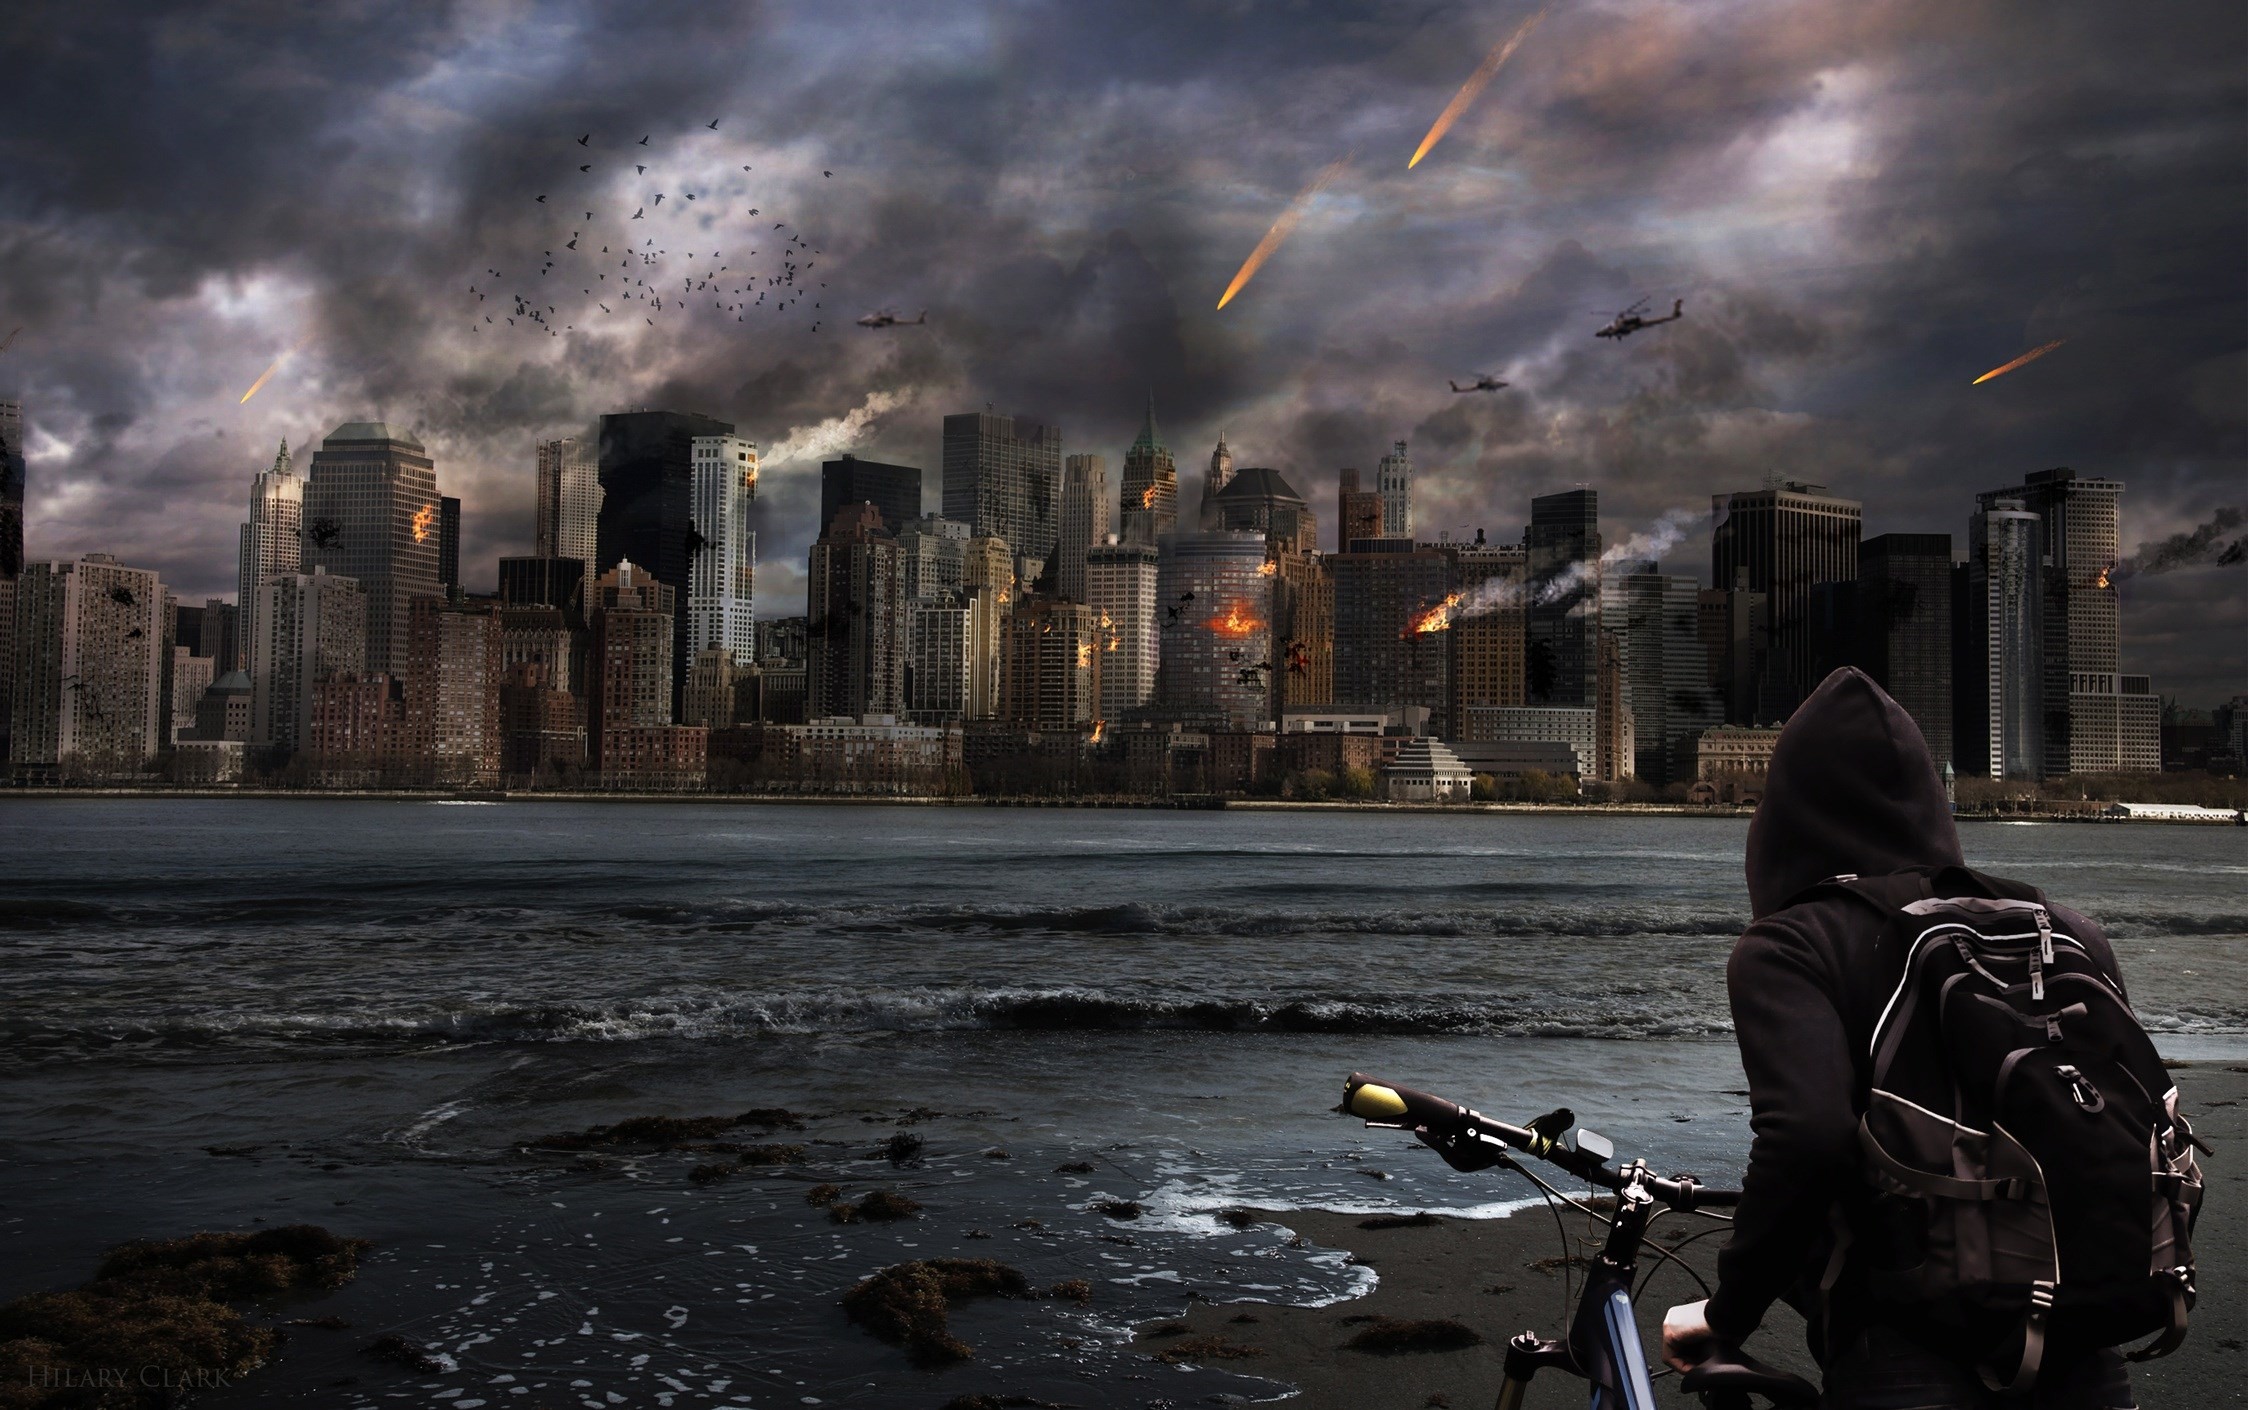 2248x1410 HDQ Images apocalyptic pic - apocalyptic category